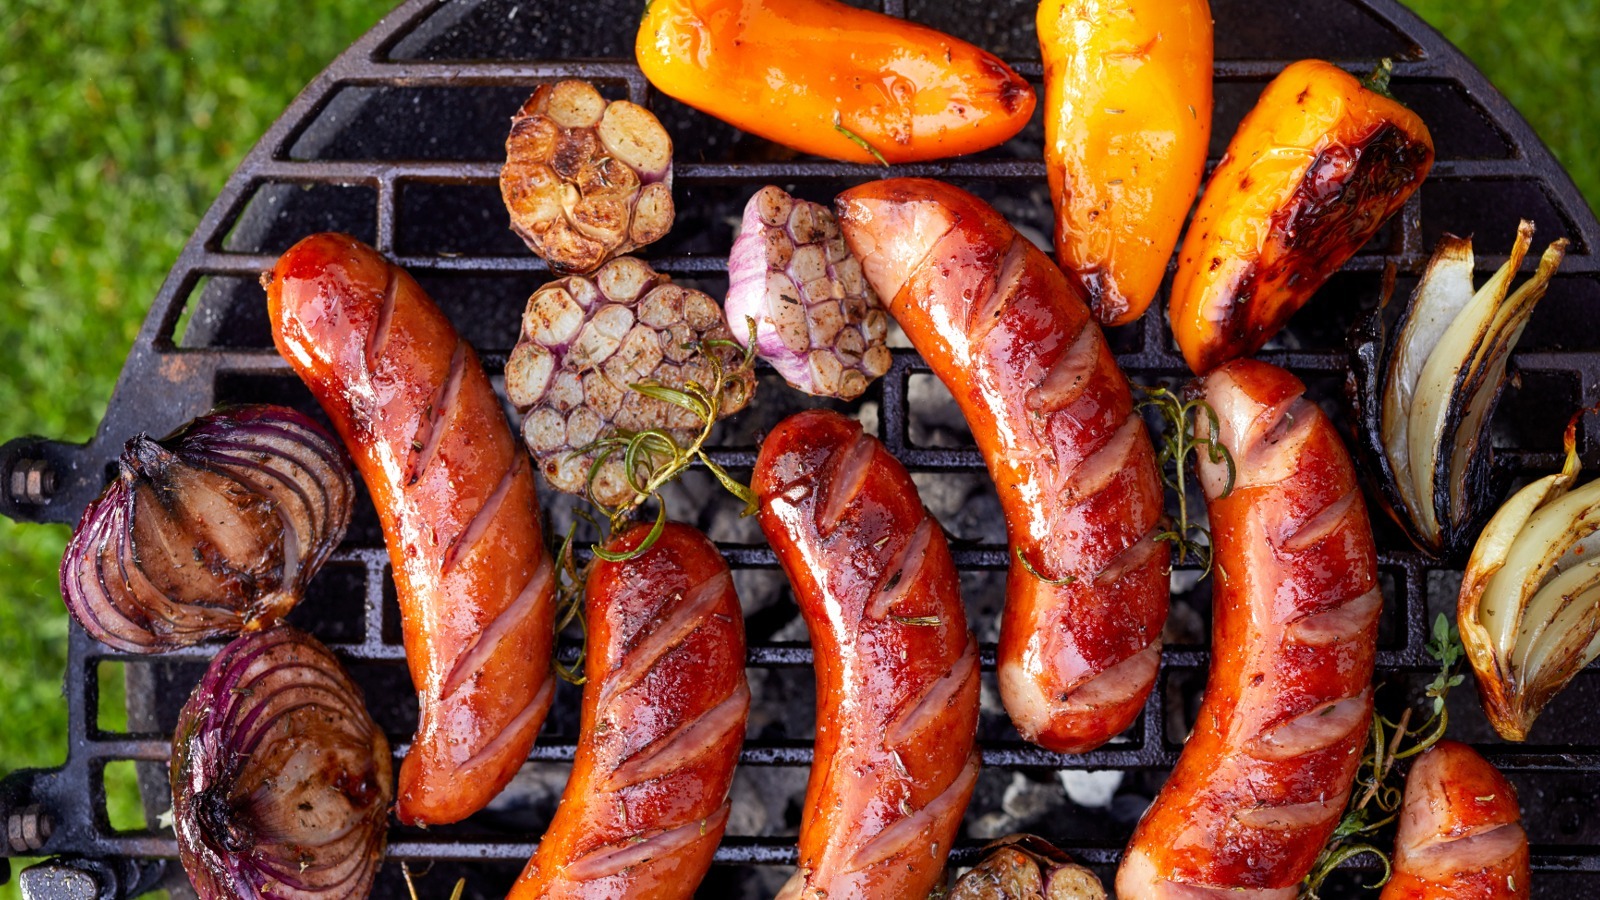 https://www.tastingtable.com/img/gallery/the-flavorful-method-for-grilling-sausages-with-onions-and-peppers/l-intro-1688163393.jpg